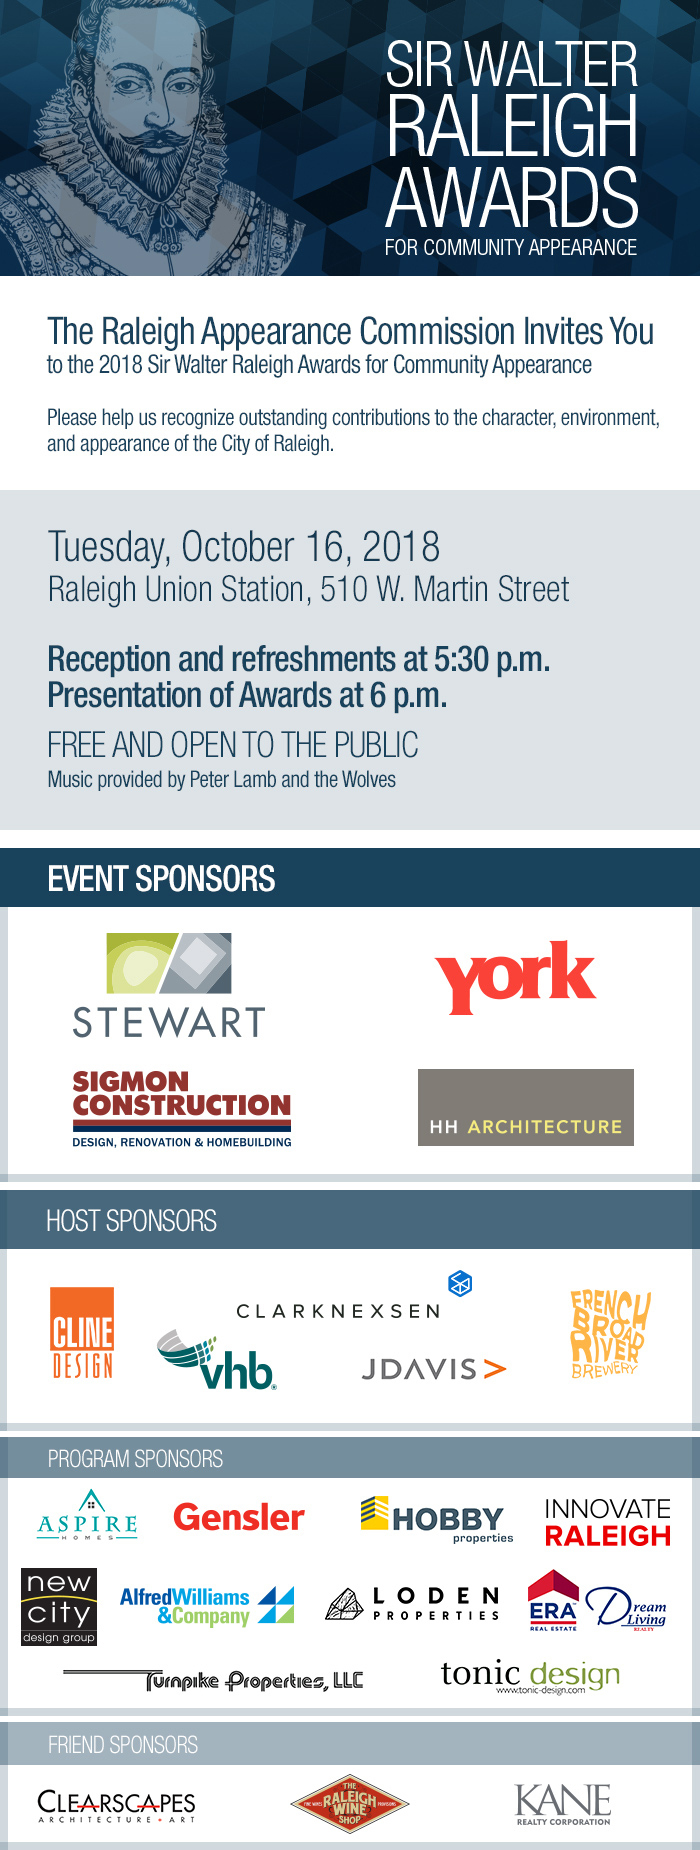 The 2018 Sir Walter Raleigh Awards ceremony will be held Tuesday, October 16 at Raleigh Union Station, 510 West Martin Street. Reception and refreshments at 5:30 p.m. Presentation of Awards at 6 p.m. This event is free and open to the public.